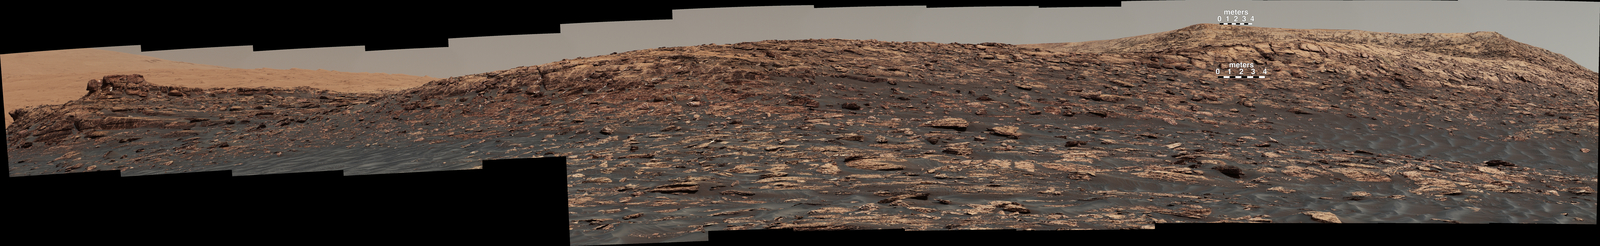 "Vera Rubin Ridge," a favored destination for NASA's Curiosity Mars rover even before the rover landed in 2012, rises near the rover nearly five years later in this panorama from Curiosity's Mast Camera (Mastcam).  Two scale bars of 4 meters (13.1 feet) provide size information for features near the bottom of the ridge and at the highest point visible on the ridge.